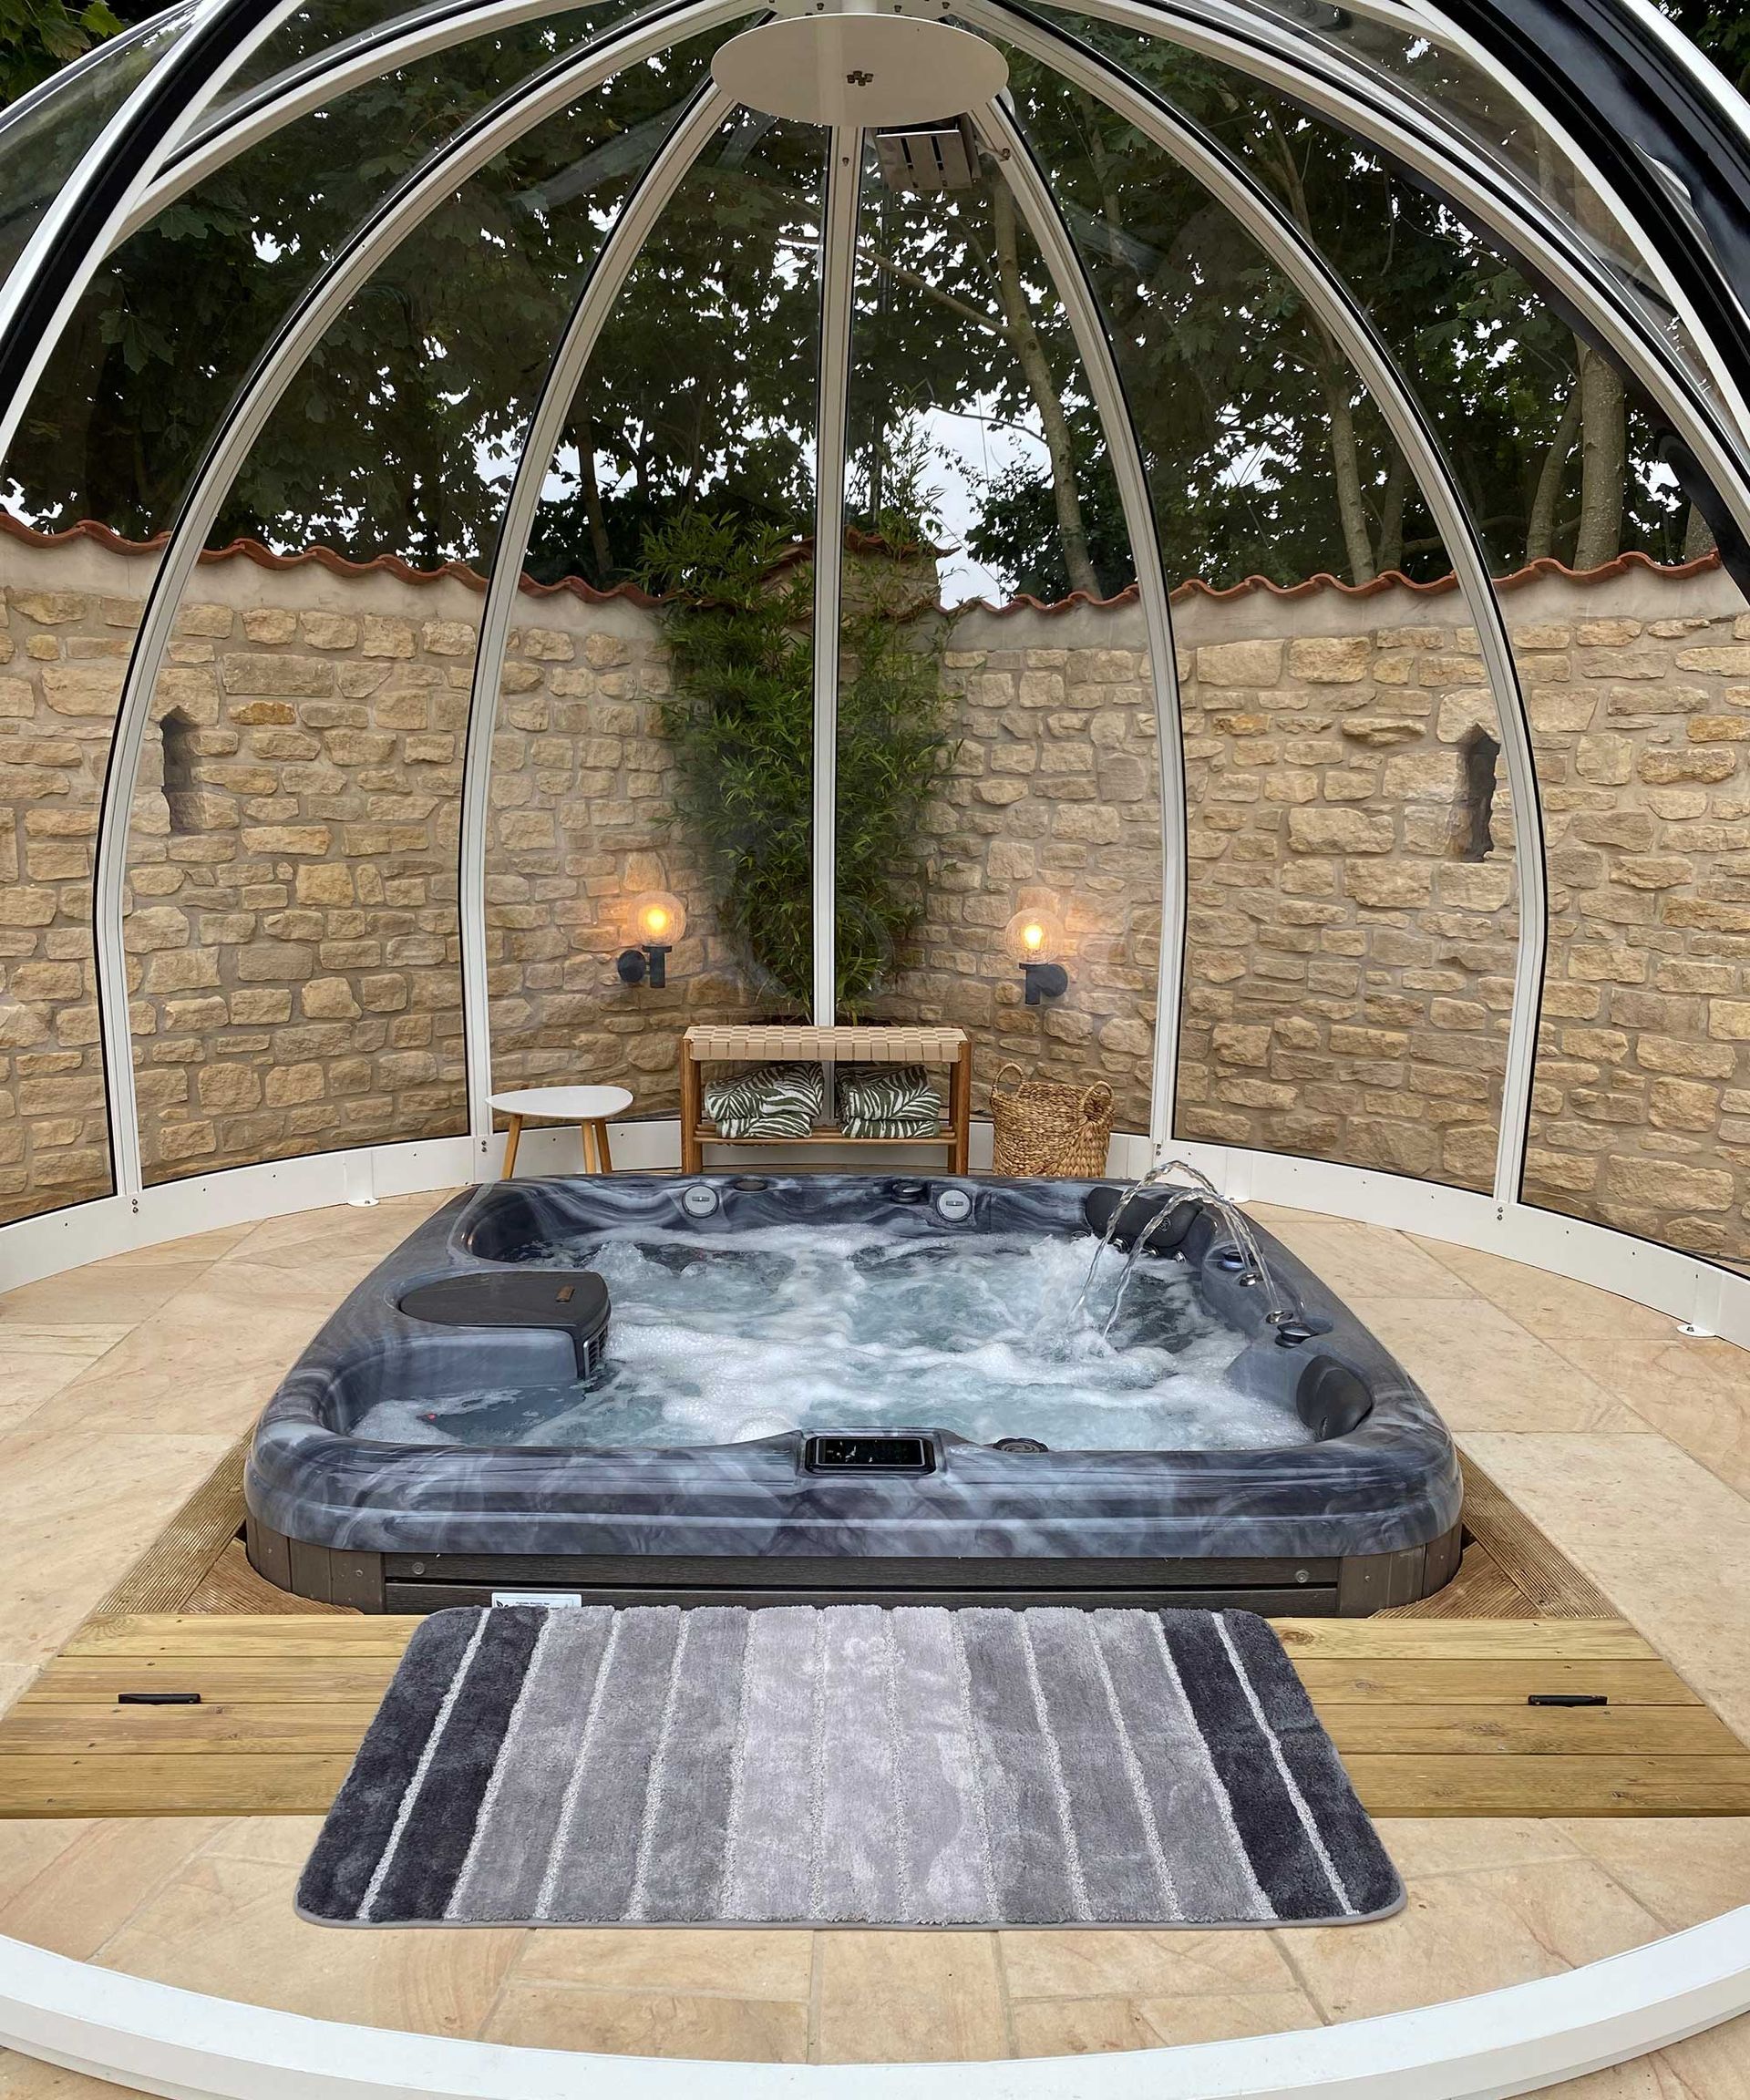 <p>                     Adding a hot tub shelter to your relaxation space is the way forward if you want to use the zone all year-round. From awnings to pergolas, there are plenty of options available. But, if you're looking for something a little different from the norm, a smart structure like this won't disappoint.                   </p>                                      <p>                     The panels of this elegant, domed structure can be slid open and shut, allowing for extra protection from the elements or a dose of fresh air whenever needed, while keeping the space light and bright. It pairs beautifully with the pale stone paving, simple furniture, and a small timber spa-surround.                   </p>